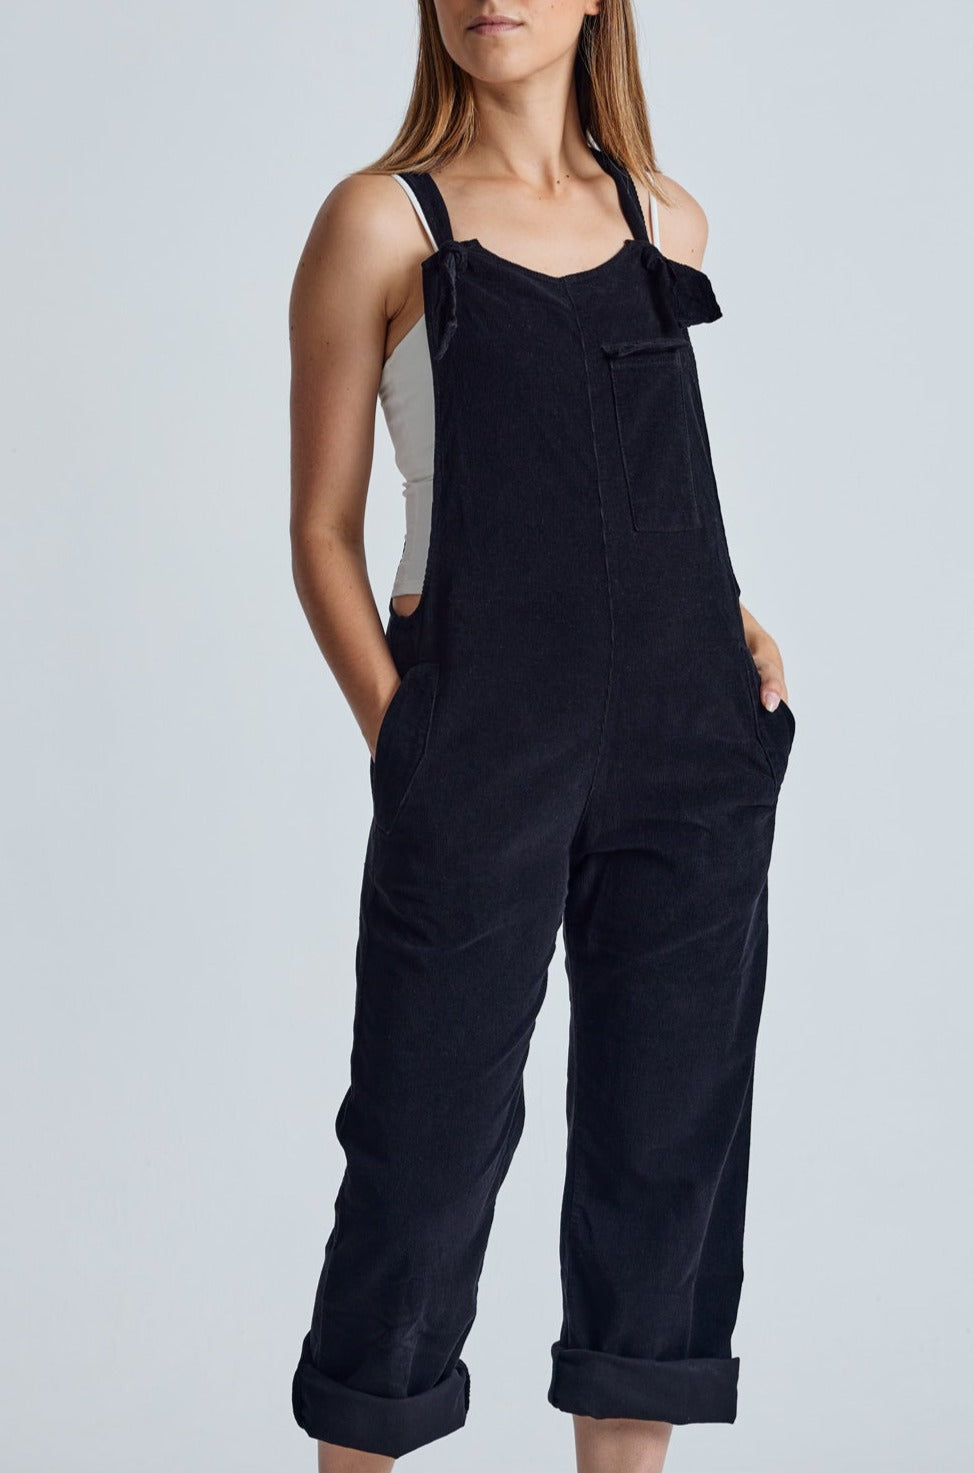 MARY-LOU Black - GOTS Organic Cotton Cord Dungarees by Flax & Loom, XS